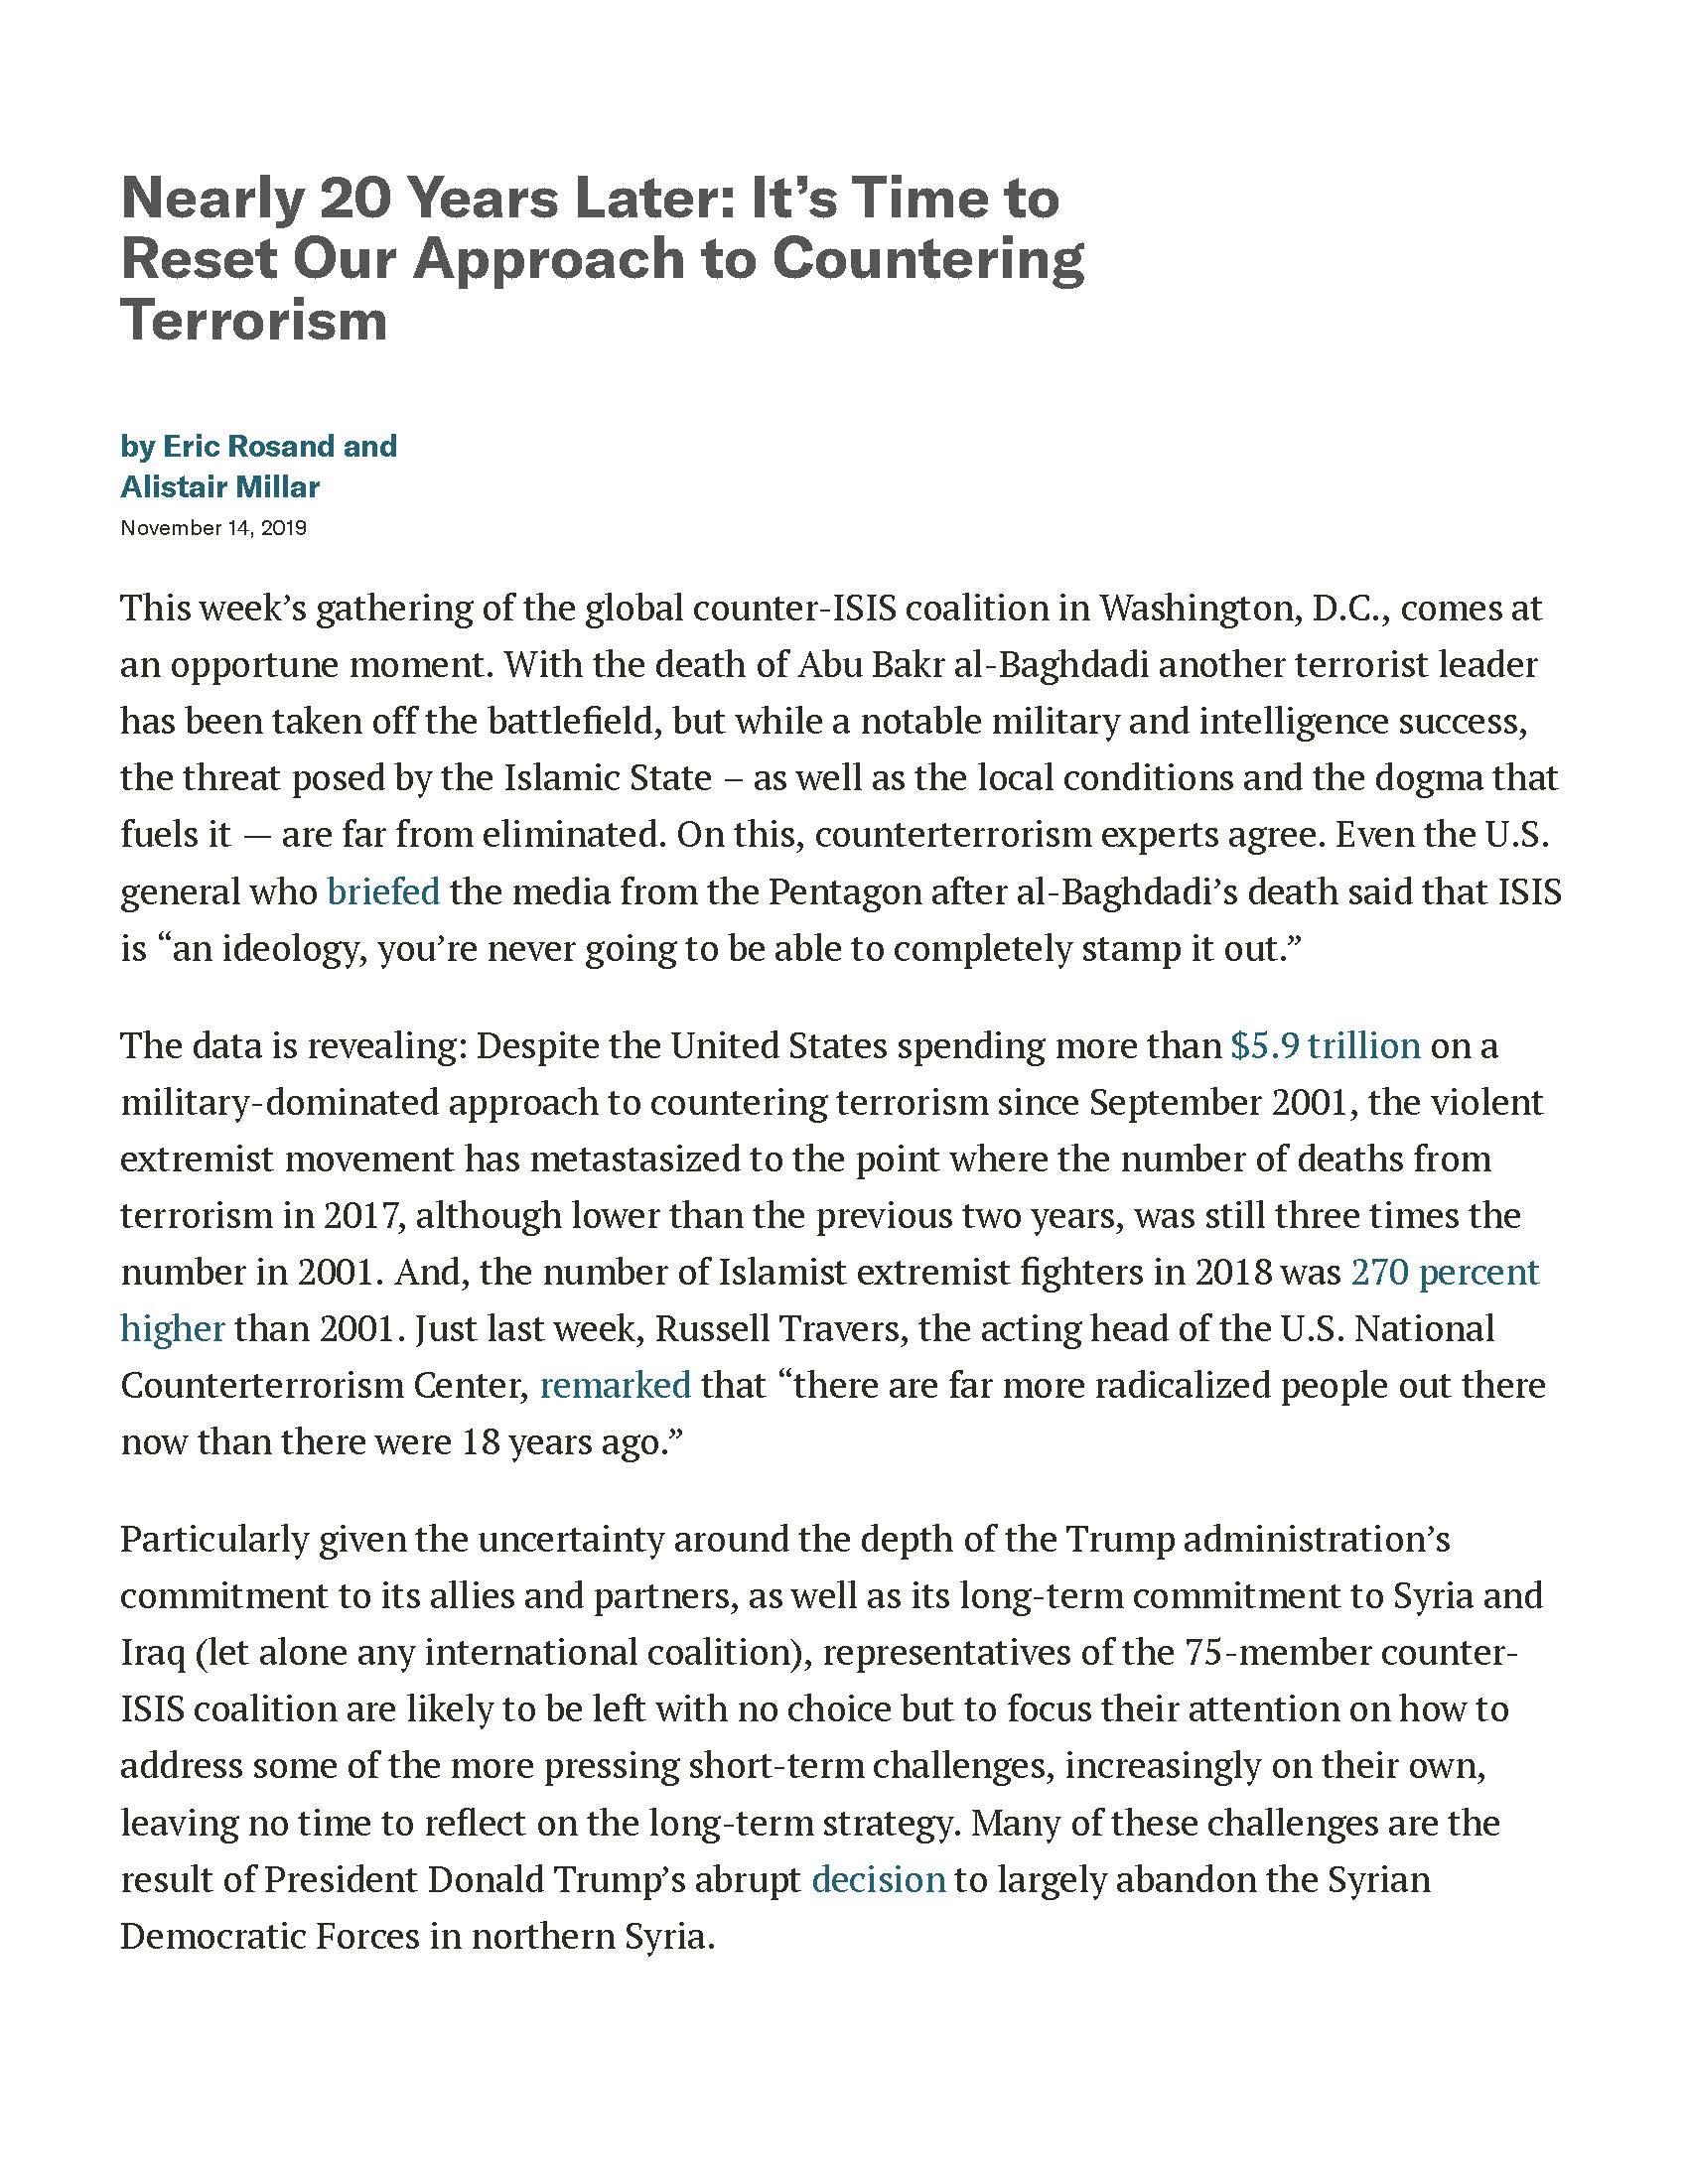 Nearly 20 Years later: It’s Time to Reset our Approach to Countering Terrorism